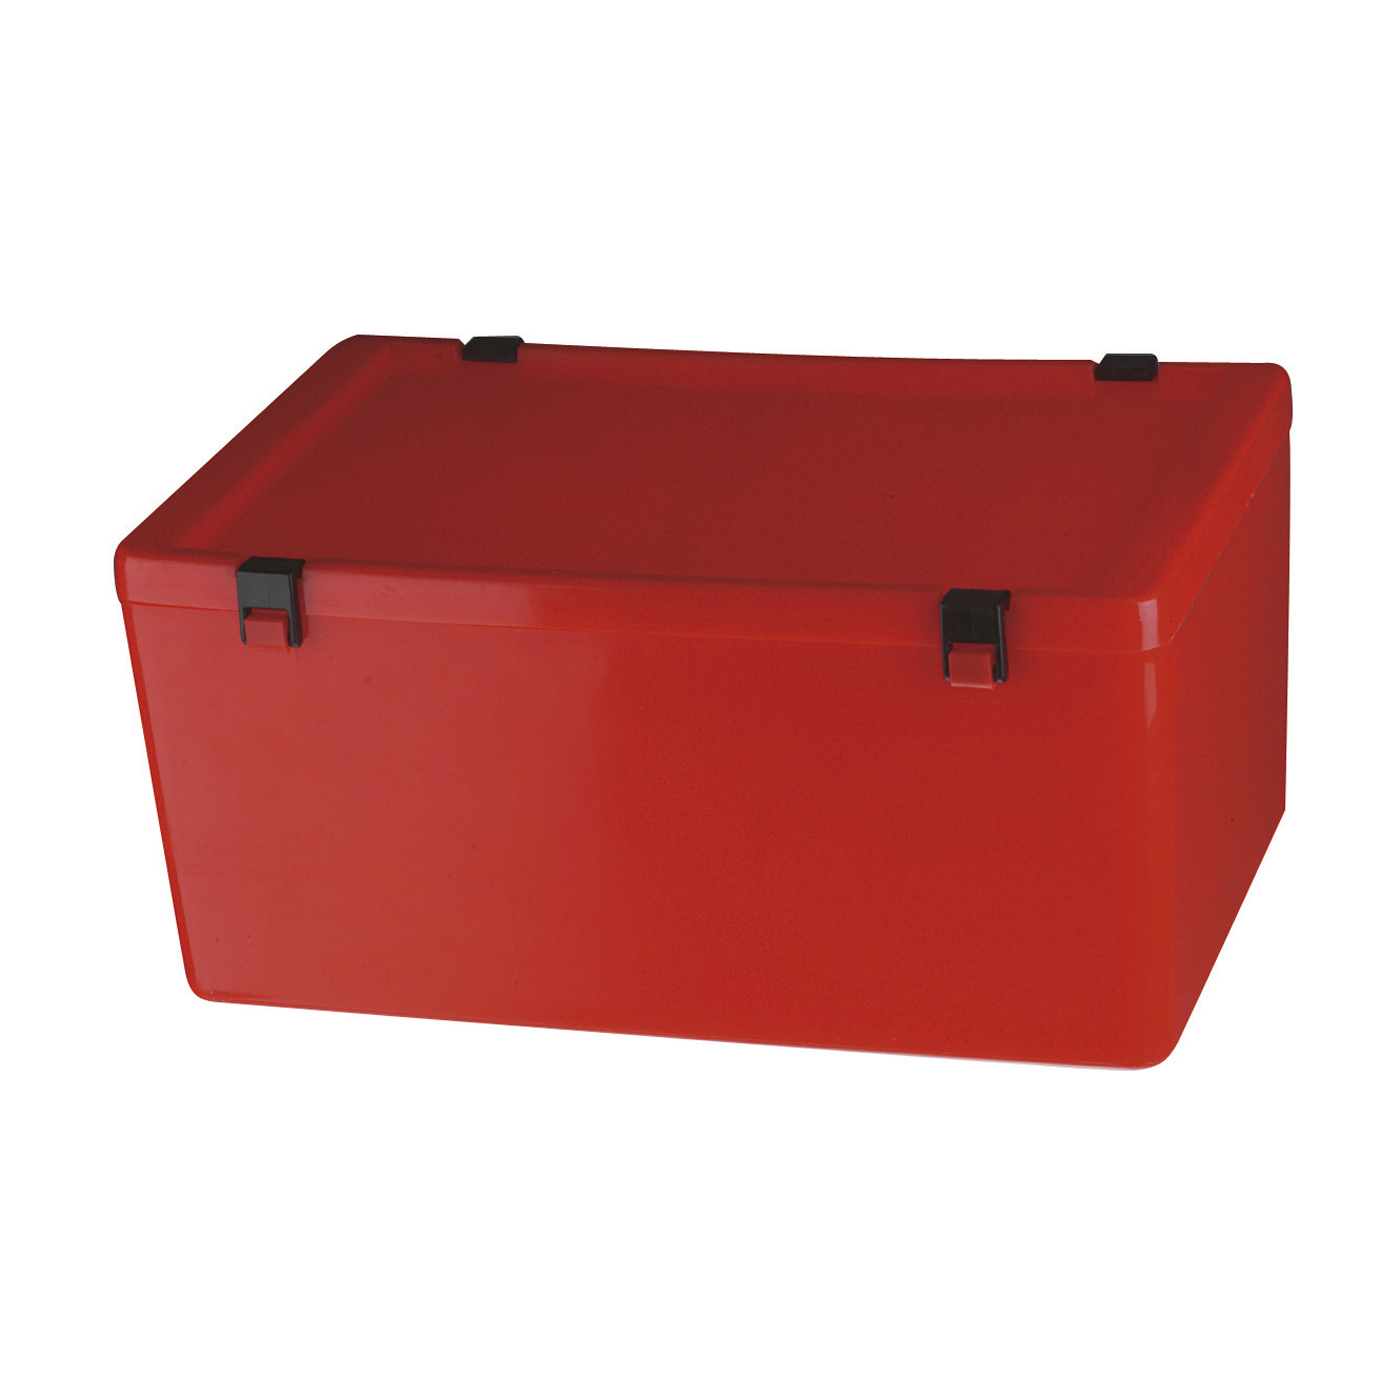 Dispatch Container, 4.5 l, Red - 1 piece